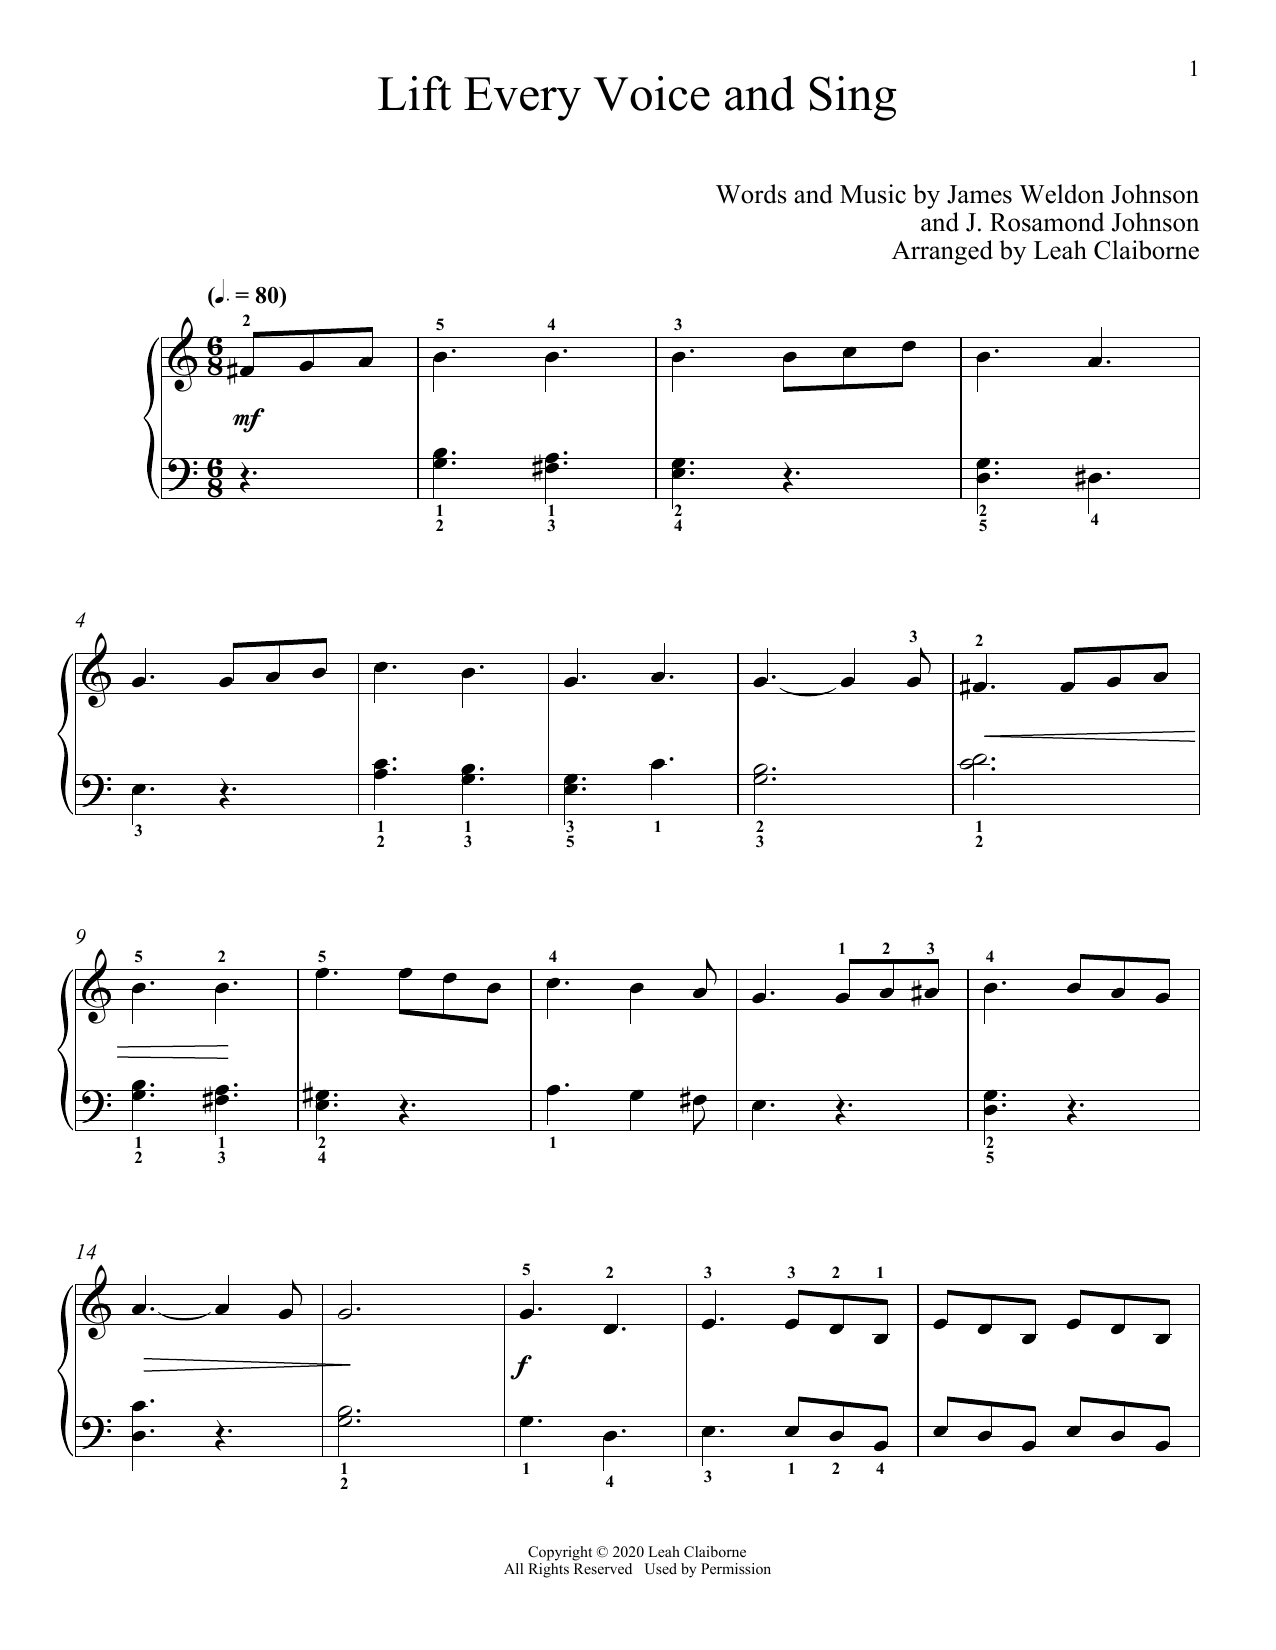 Download J. Rosamond Johnson Lift Every Voice And Sing Sheet Music